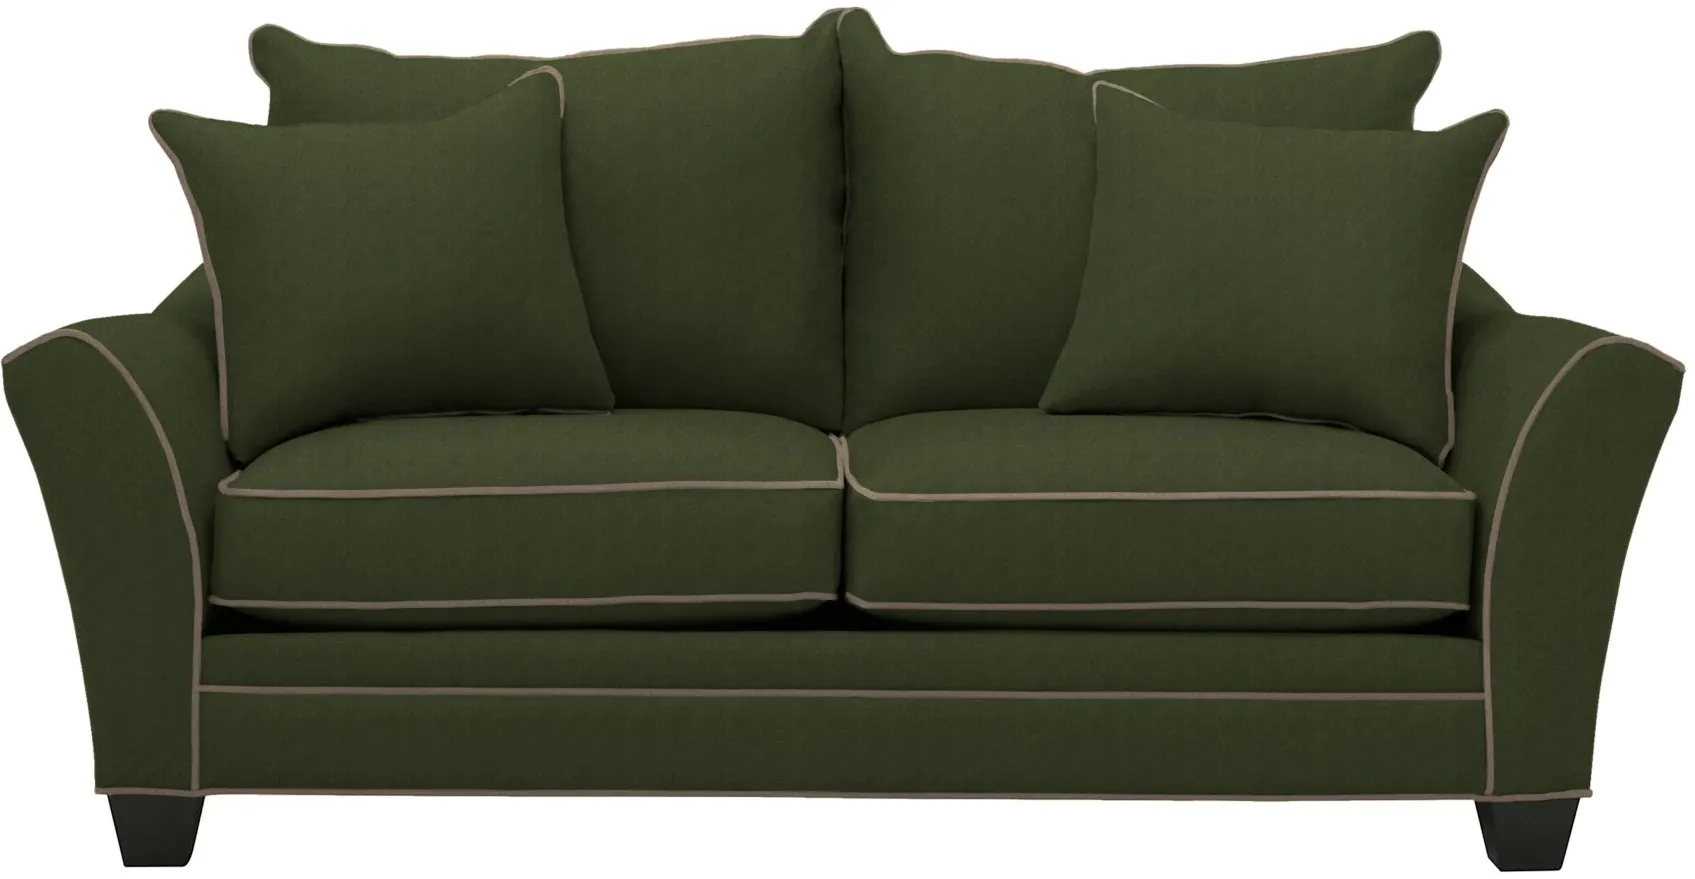 Briarwood Apartment Sleeper Sofa in Suede So Soft Pine/Khaki by H.M. Richards